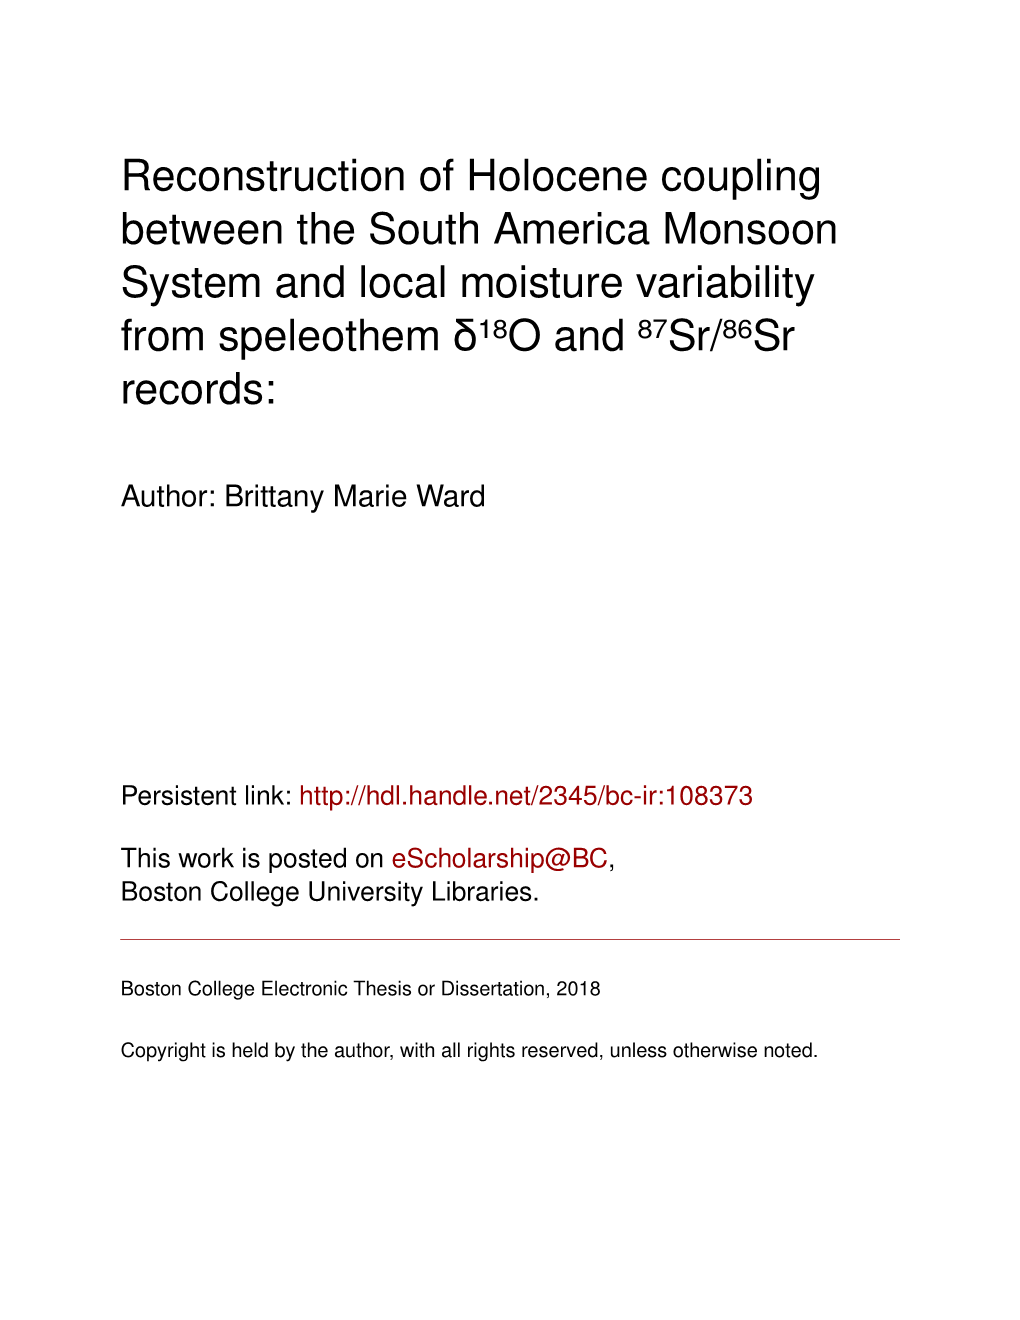 Reconstruction of Holocene Coupling Between the South America Monsoon System and Local Moisture Variability from Speleothem Δ¹⁸o and ⁸⁷Sr/⁸⁶Sr Records